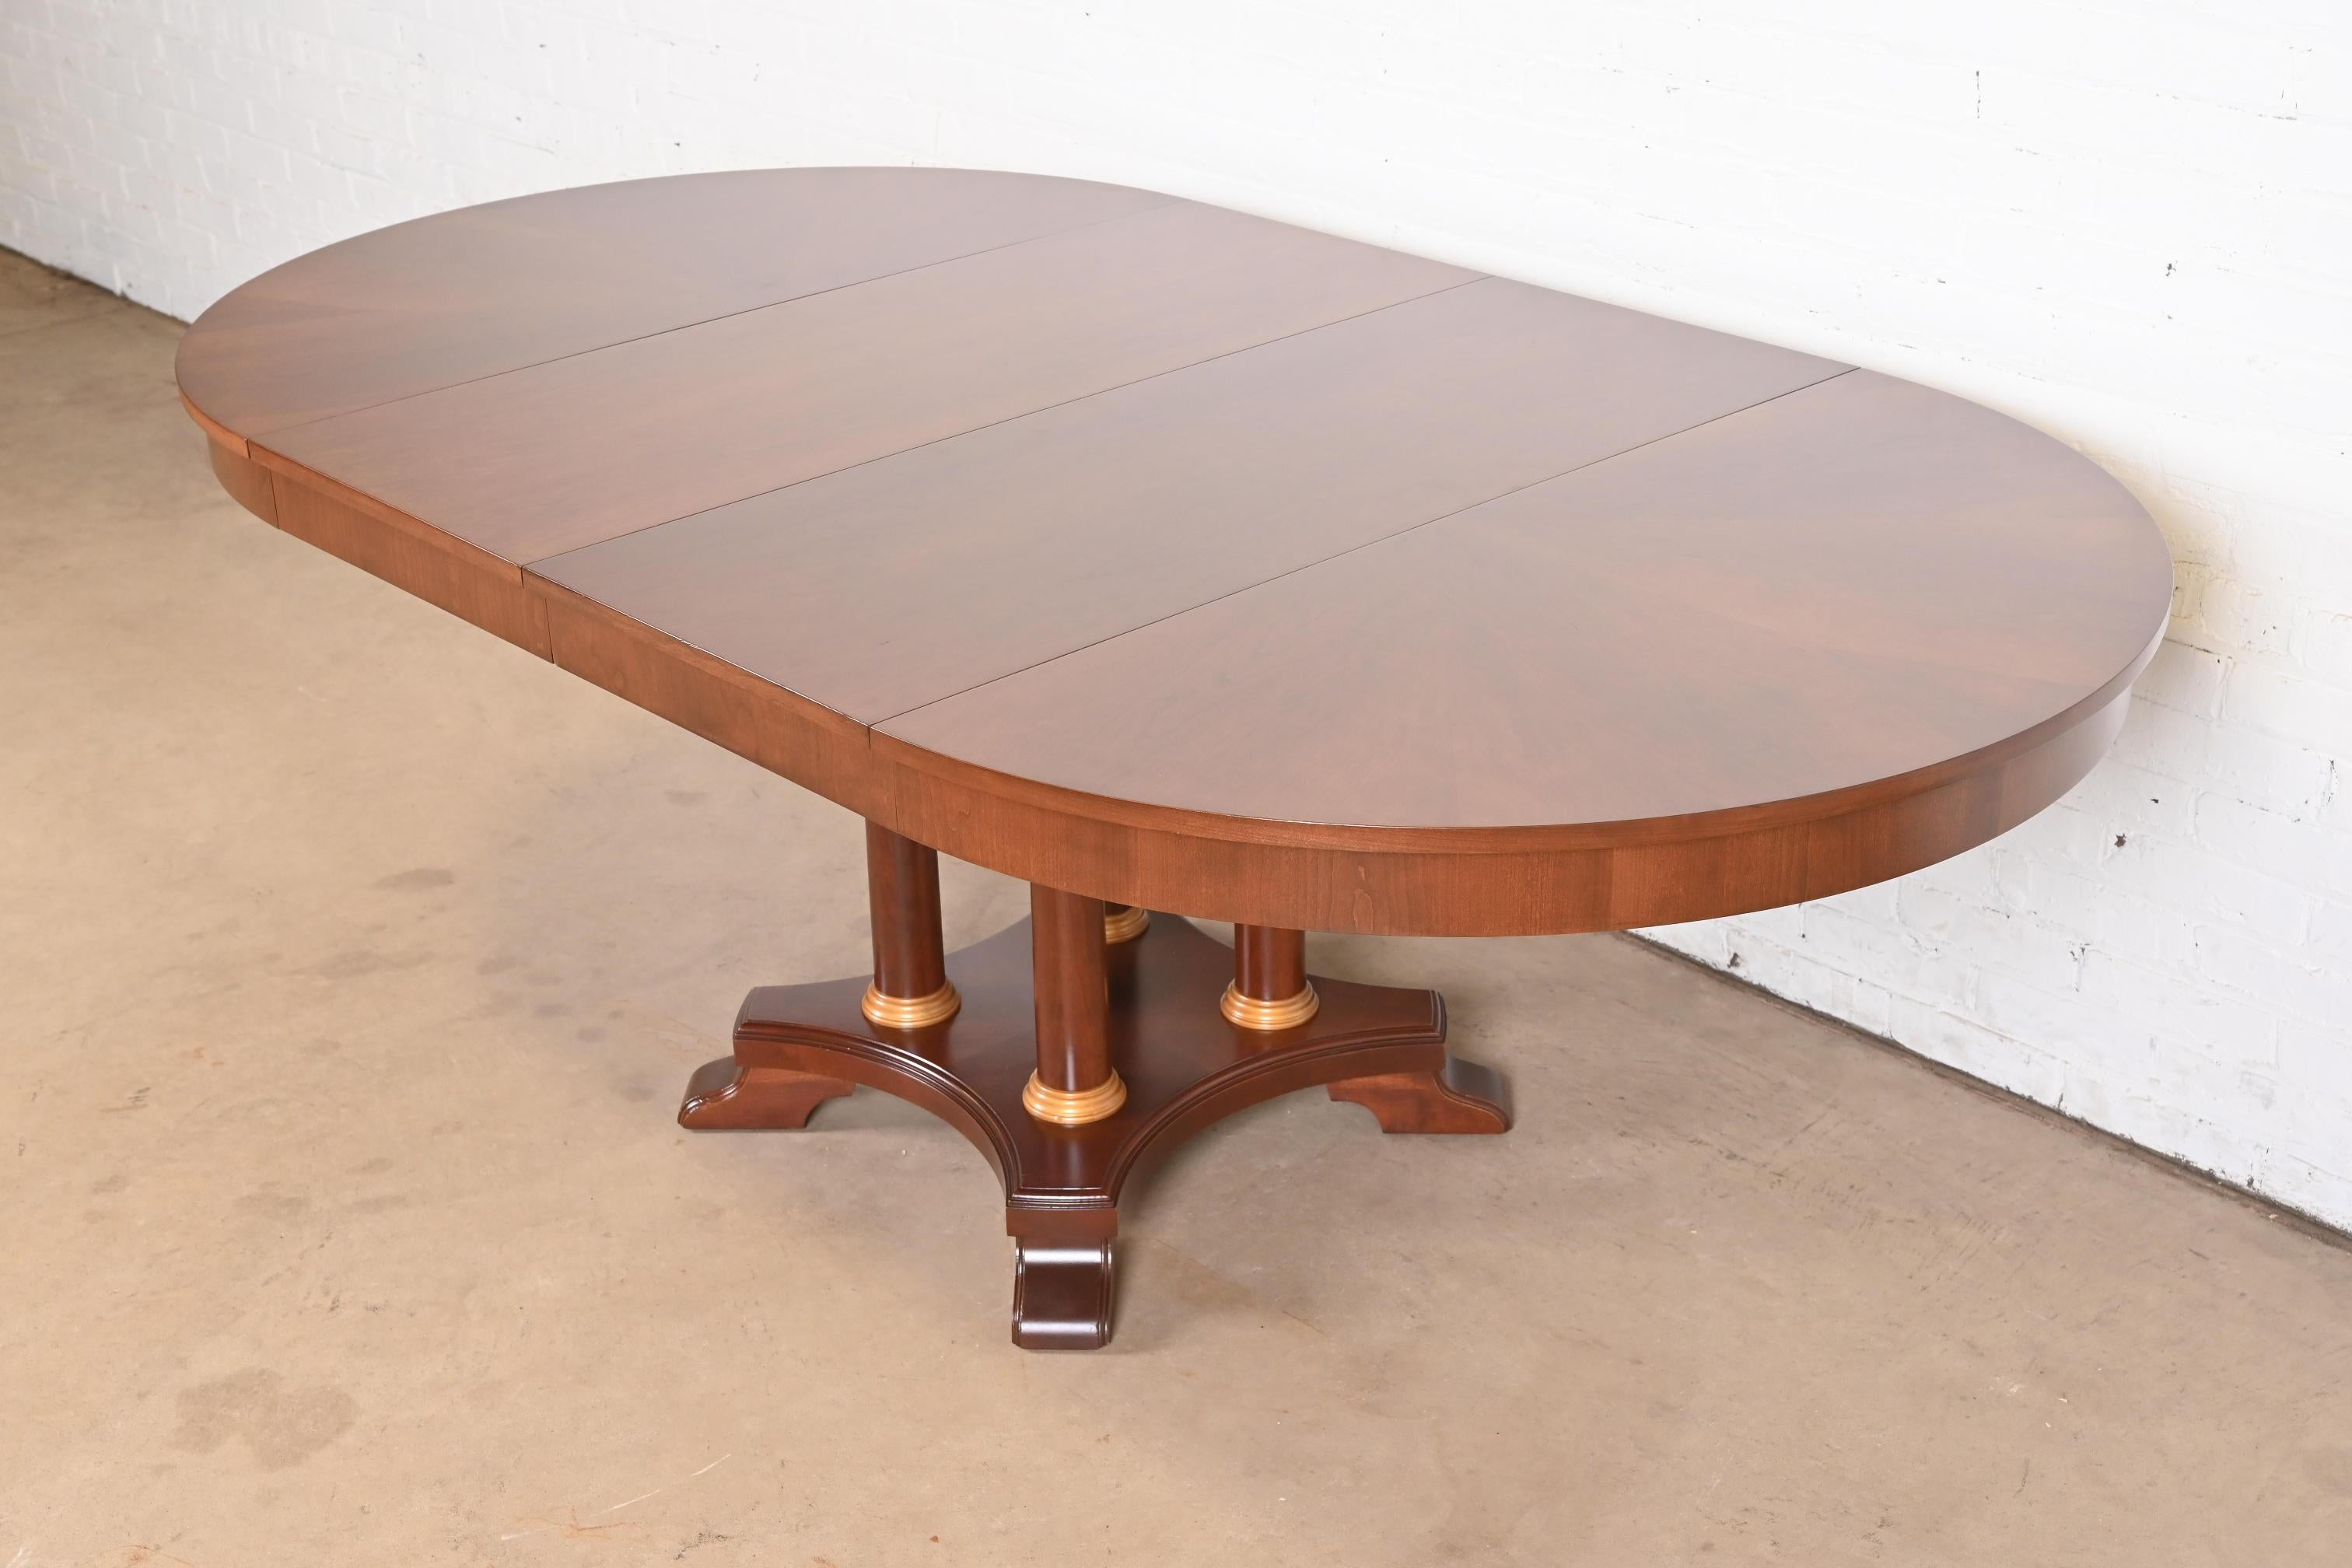 Neoclassical or Empire Cherry Wood Pedestal Dining Table, Newly Refinished In Good Condition For Sale In South Bend, IN